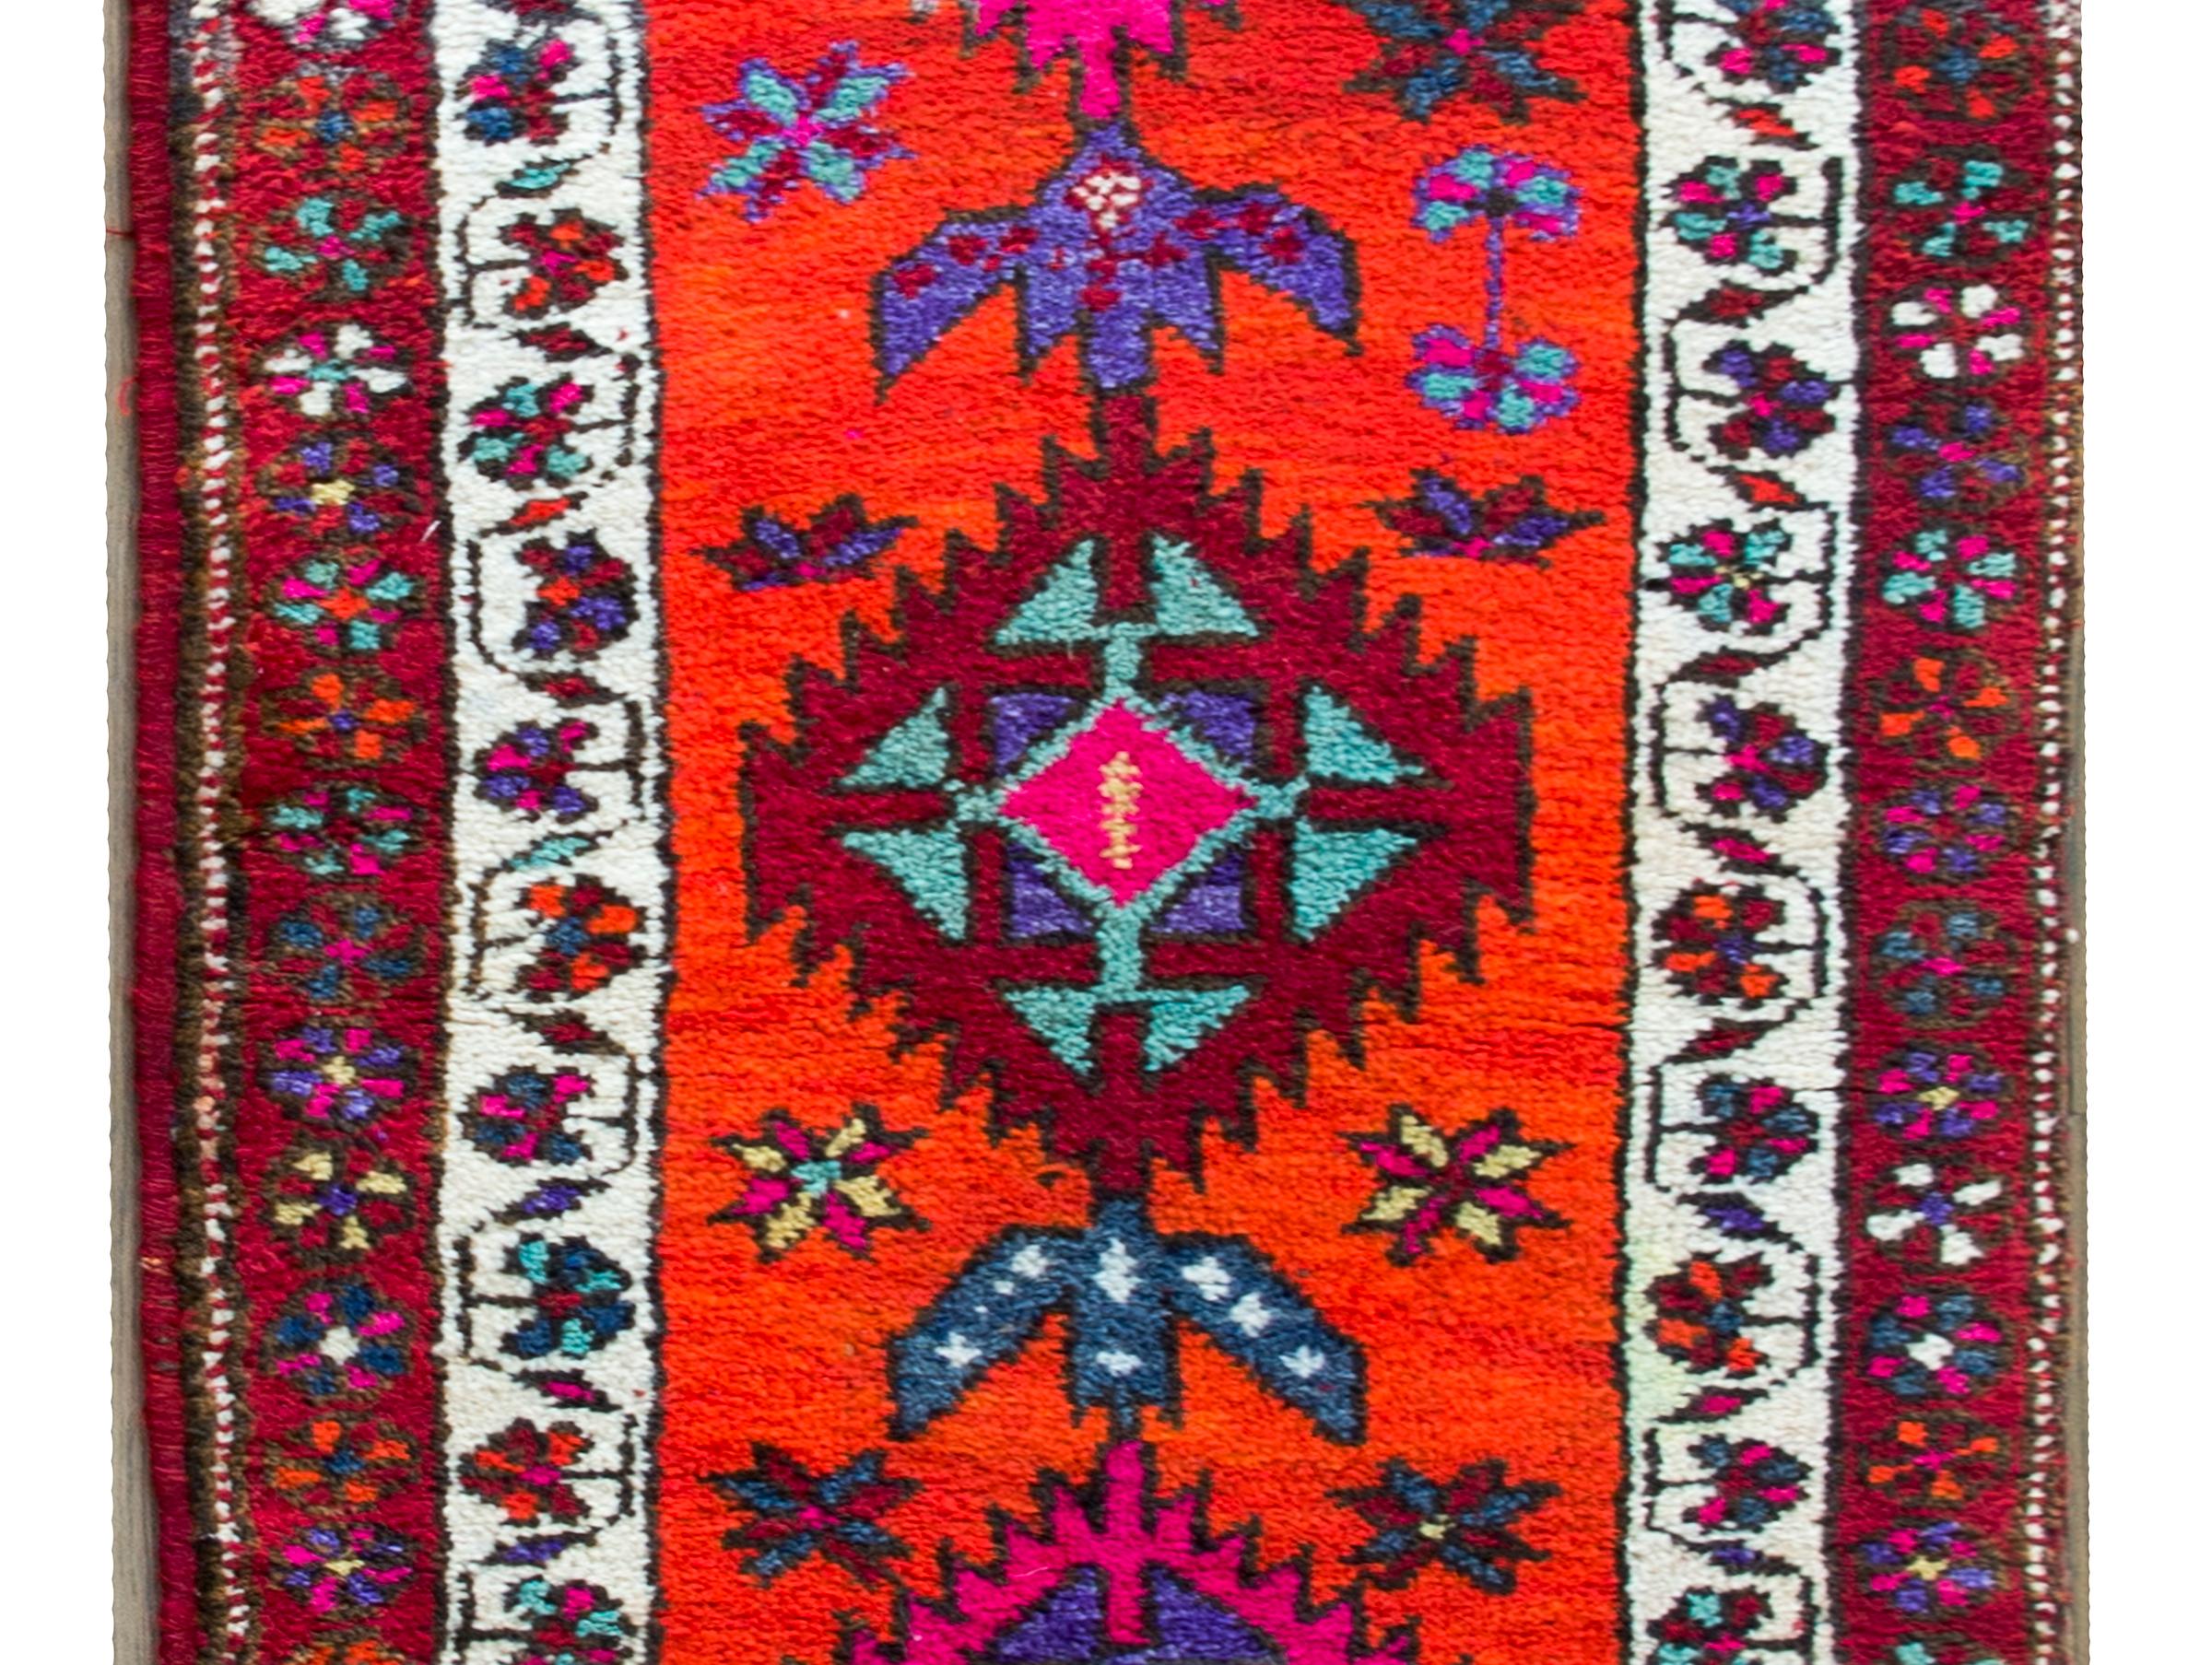 A brilliant late 20th century Turkish Konya runner with seven large brightly colored stylized flowers amidst a field of more flowers, and set against an abrash orange background. The border is simple with two different floral and scrolling vines